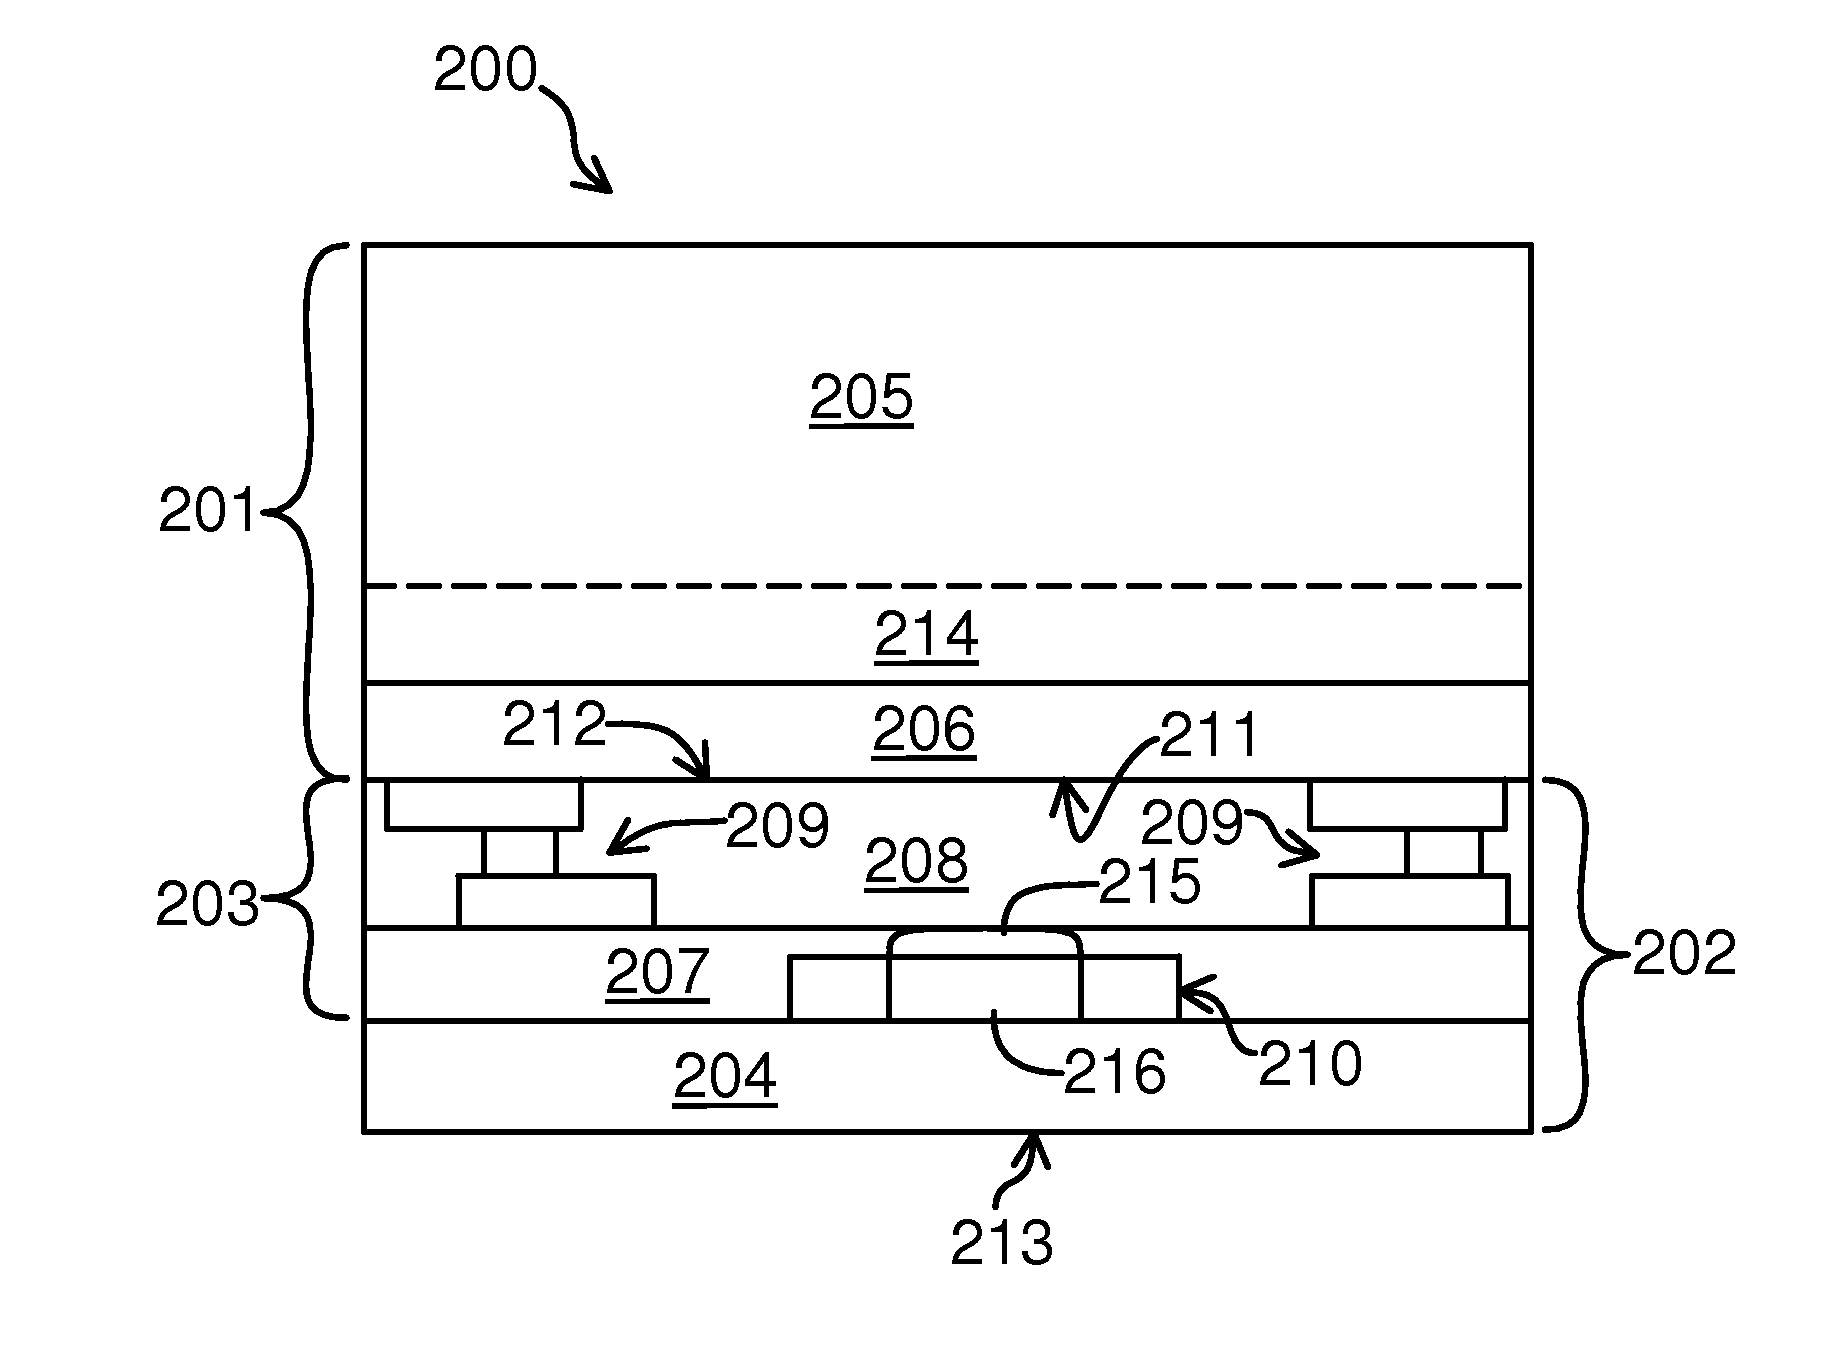 Forming Semiconductor Structure with Device Layers and TRL